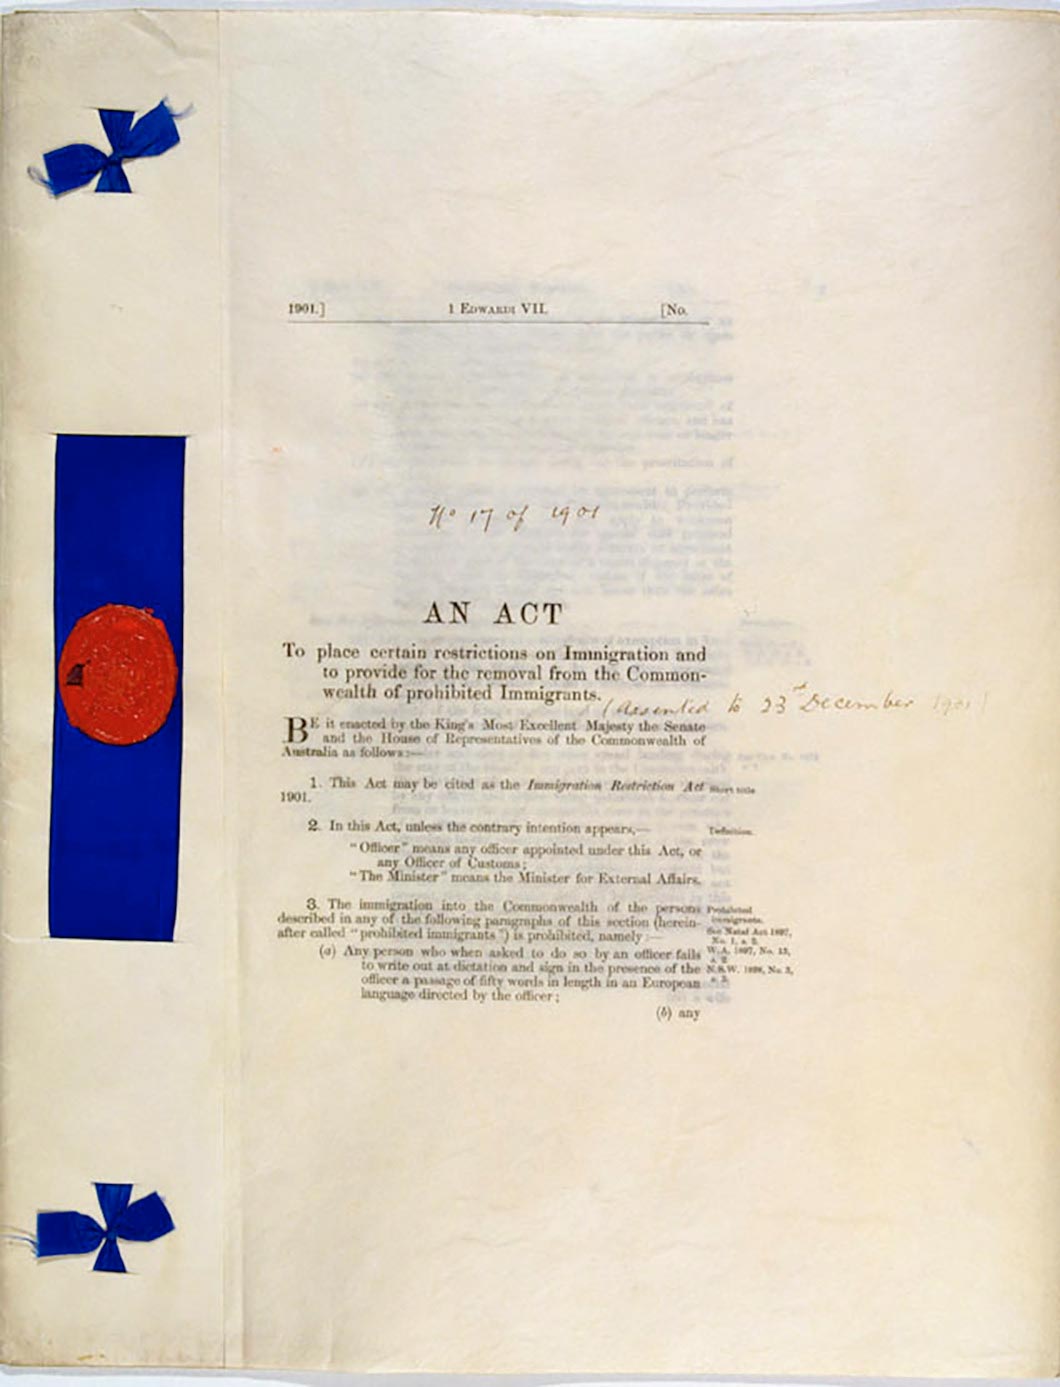 First Page of the Immigration Restriction Act 1901.